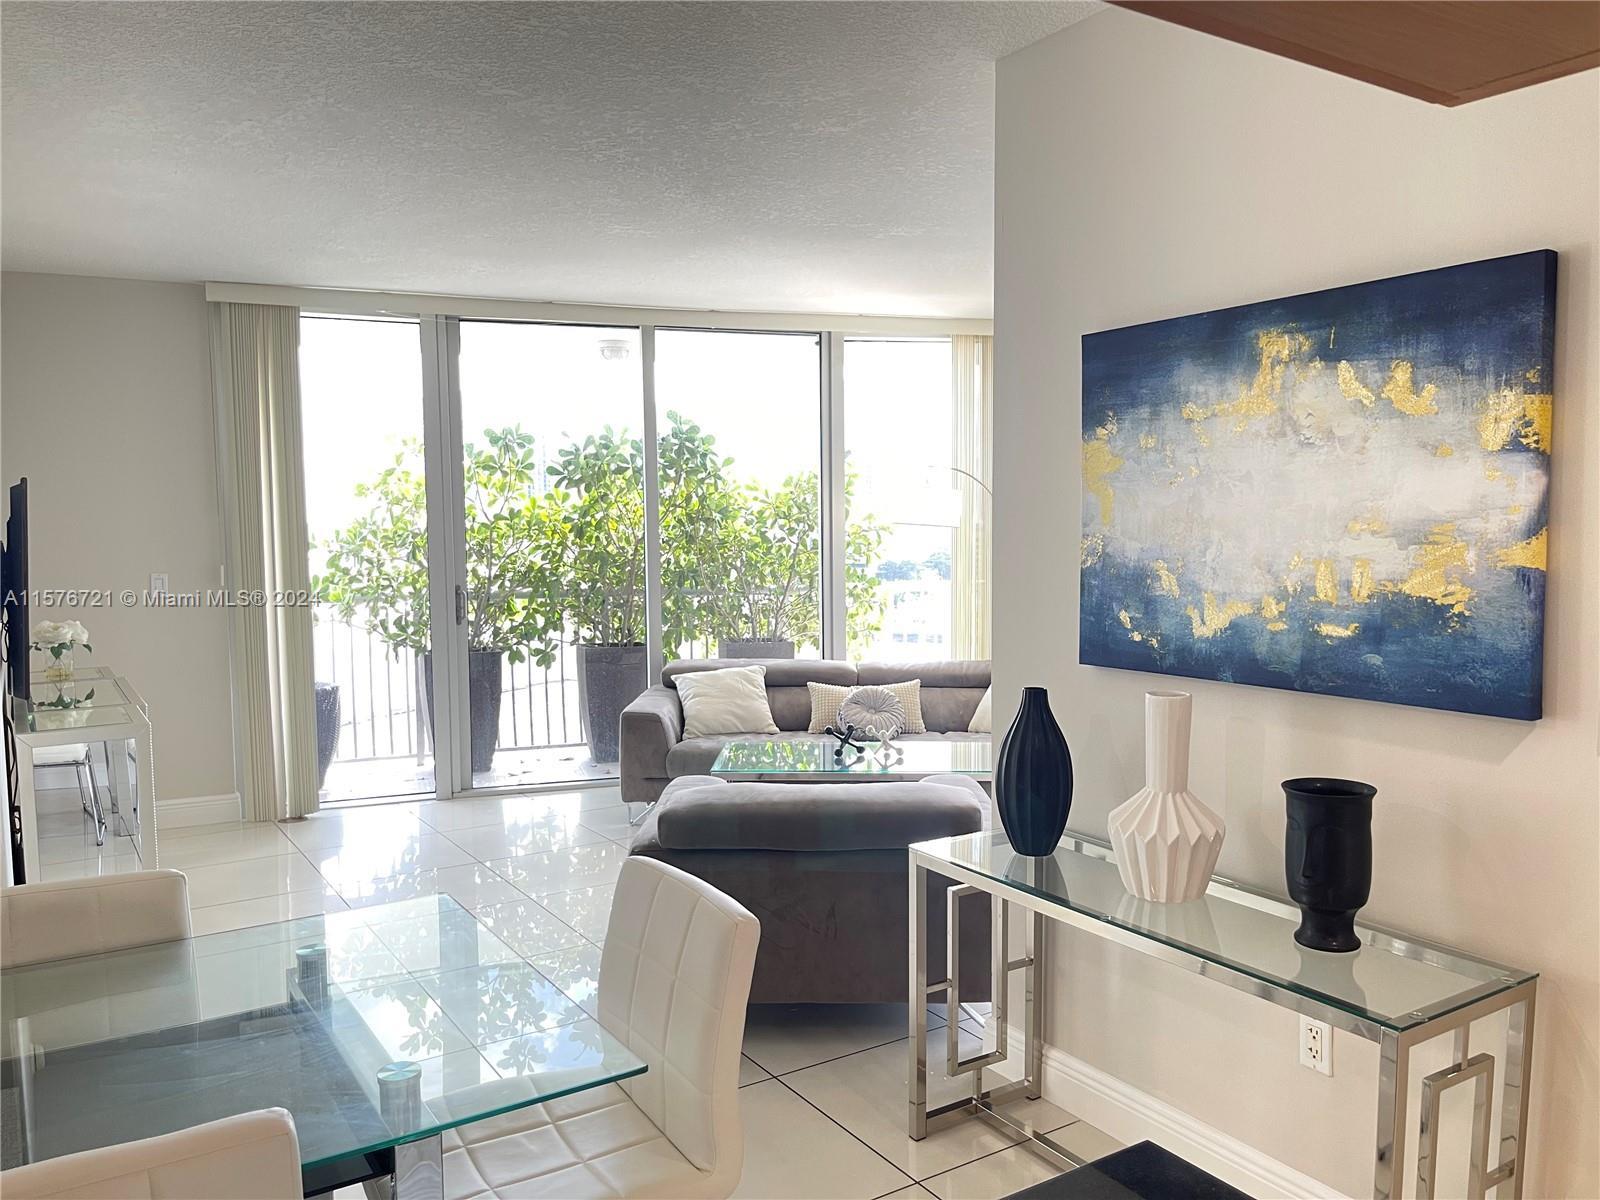 Beautiful fully furnished 2 bedroom, 2 bathroom unit located at the Iconic Resort-style Opera Tower,